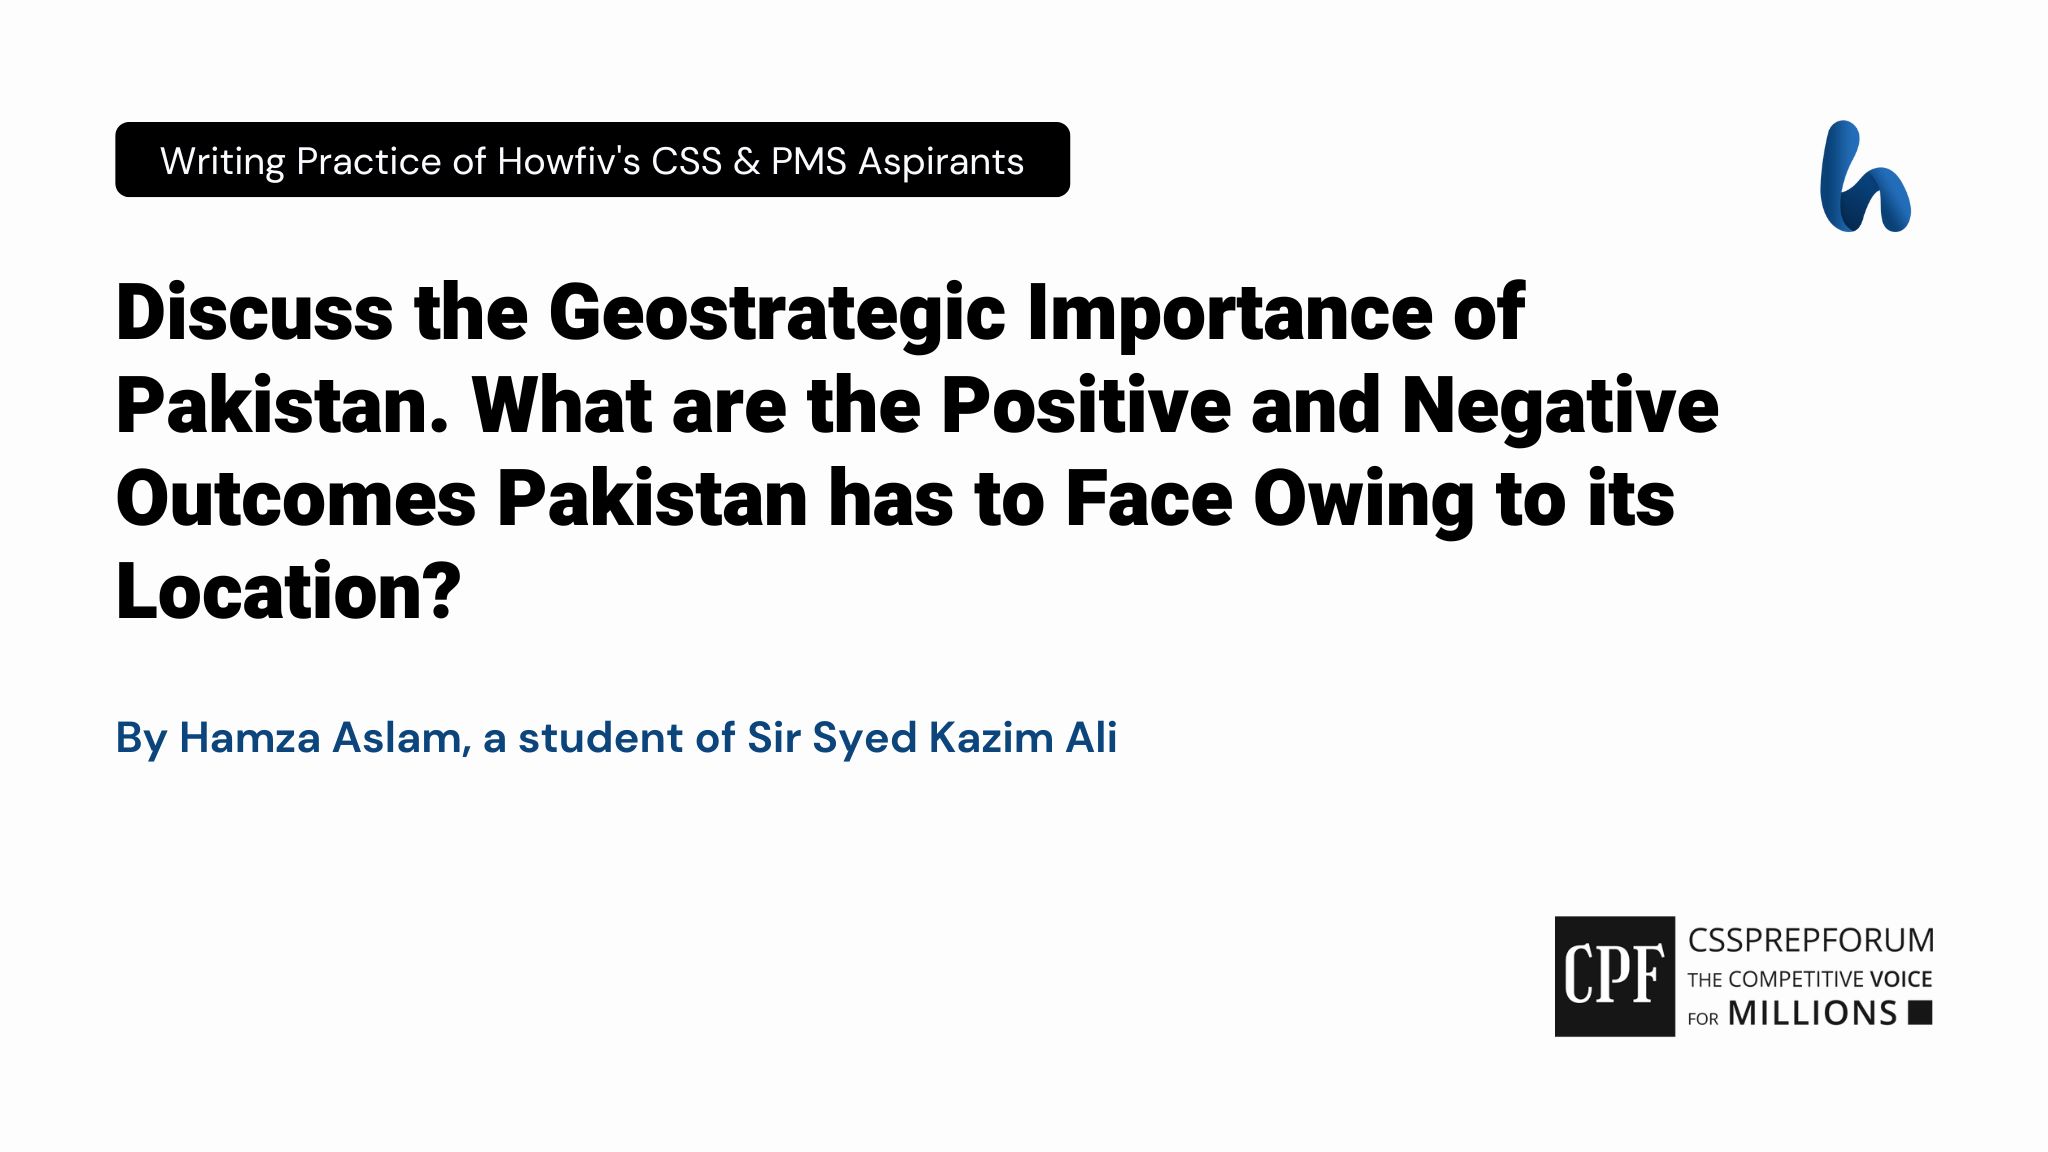 Discuss the Geostrategic Importance of Pakistan. What are the Positive and Negative Outcomes Pakistan has to Face Owing to its Location?